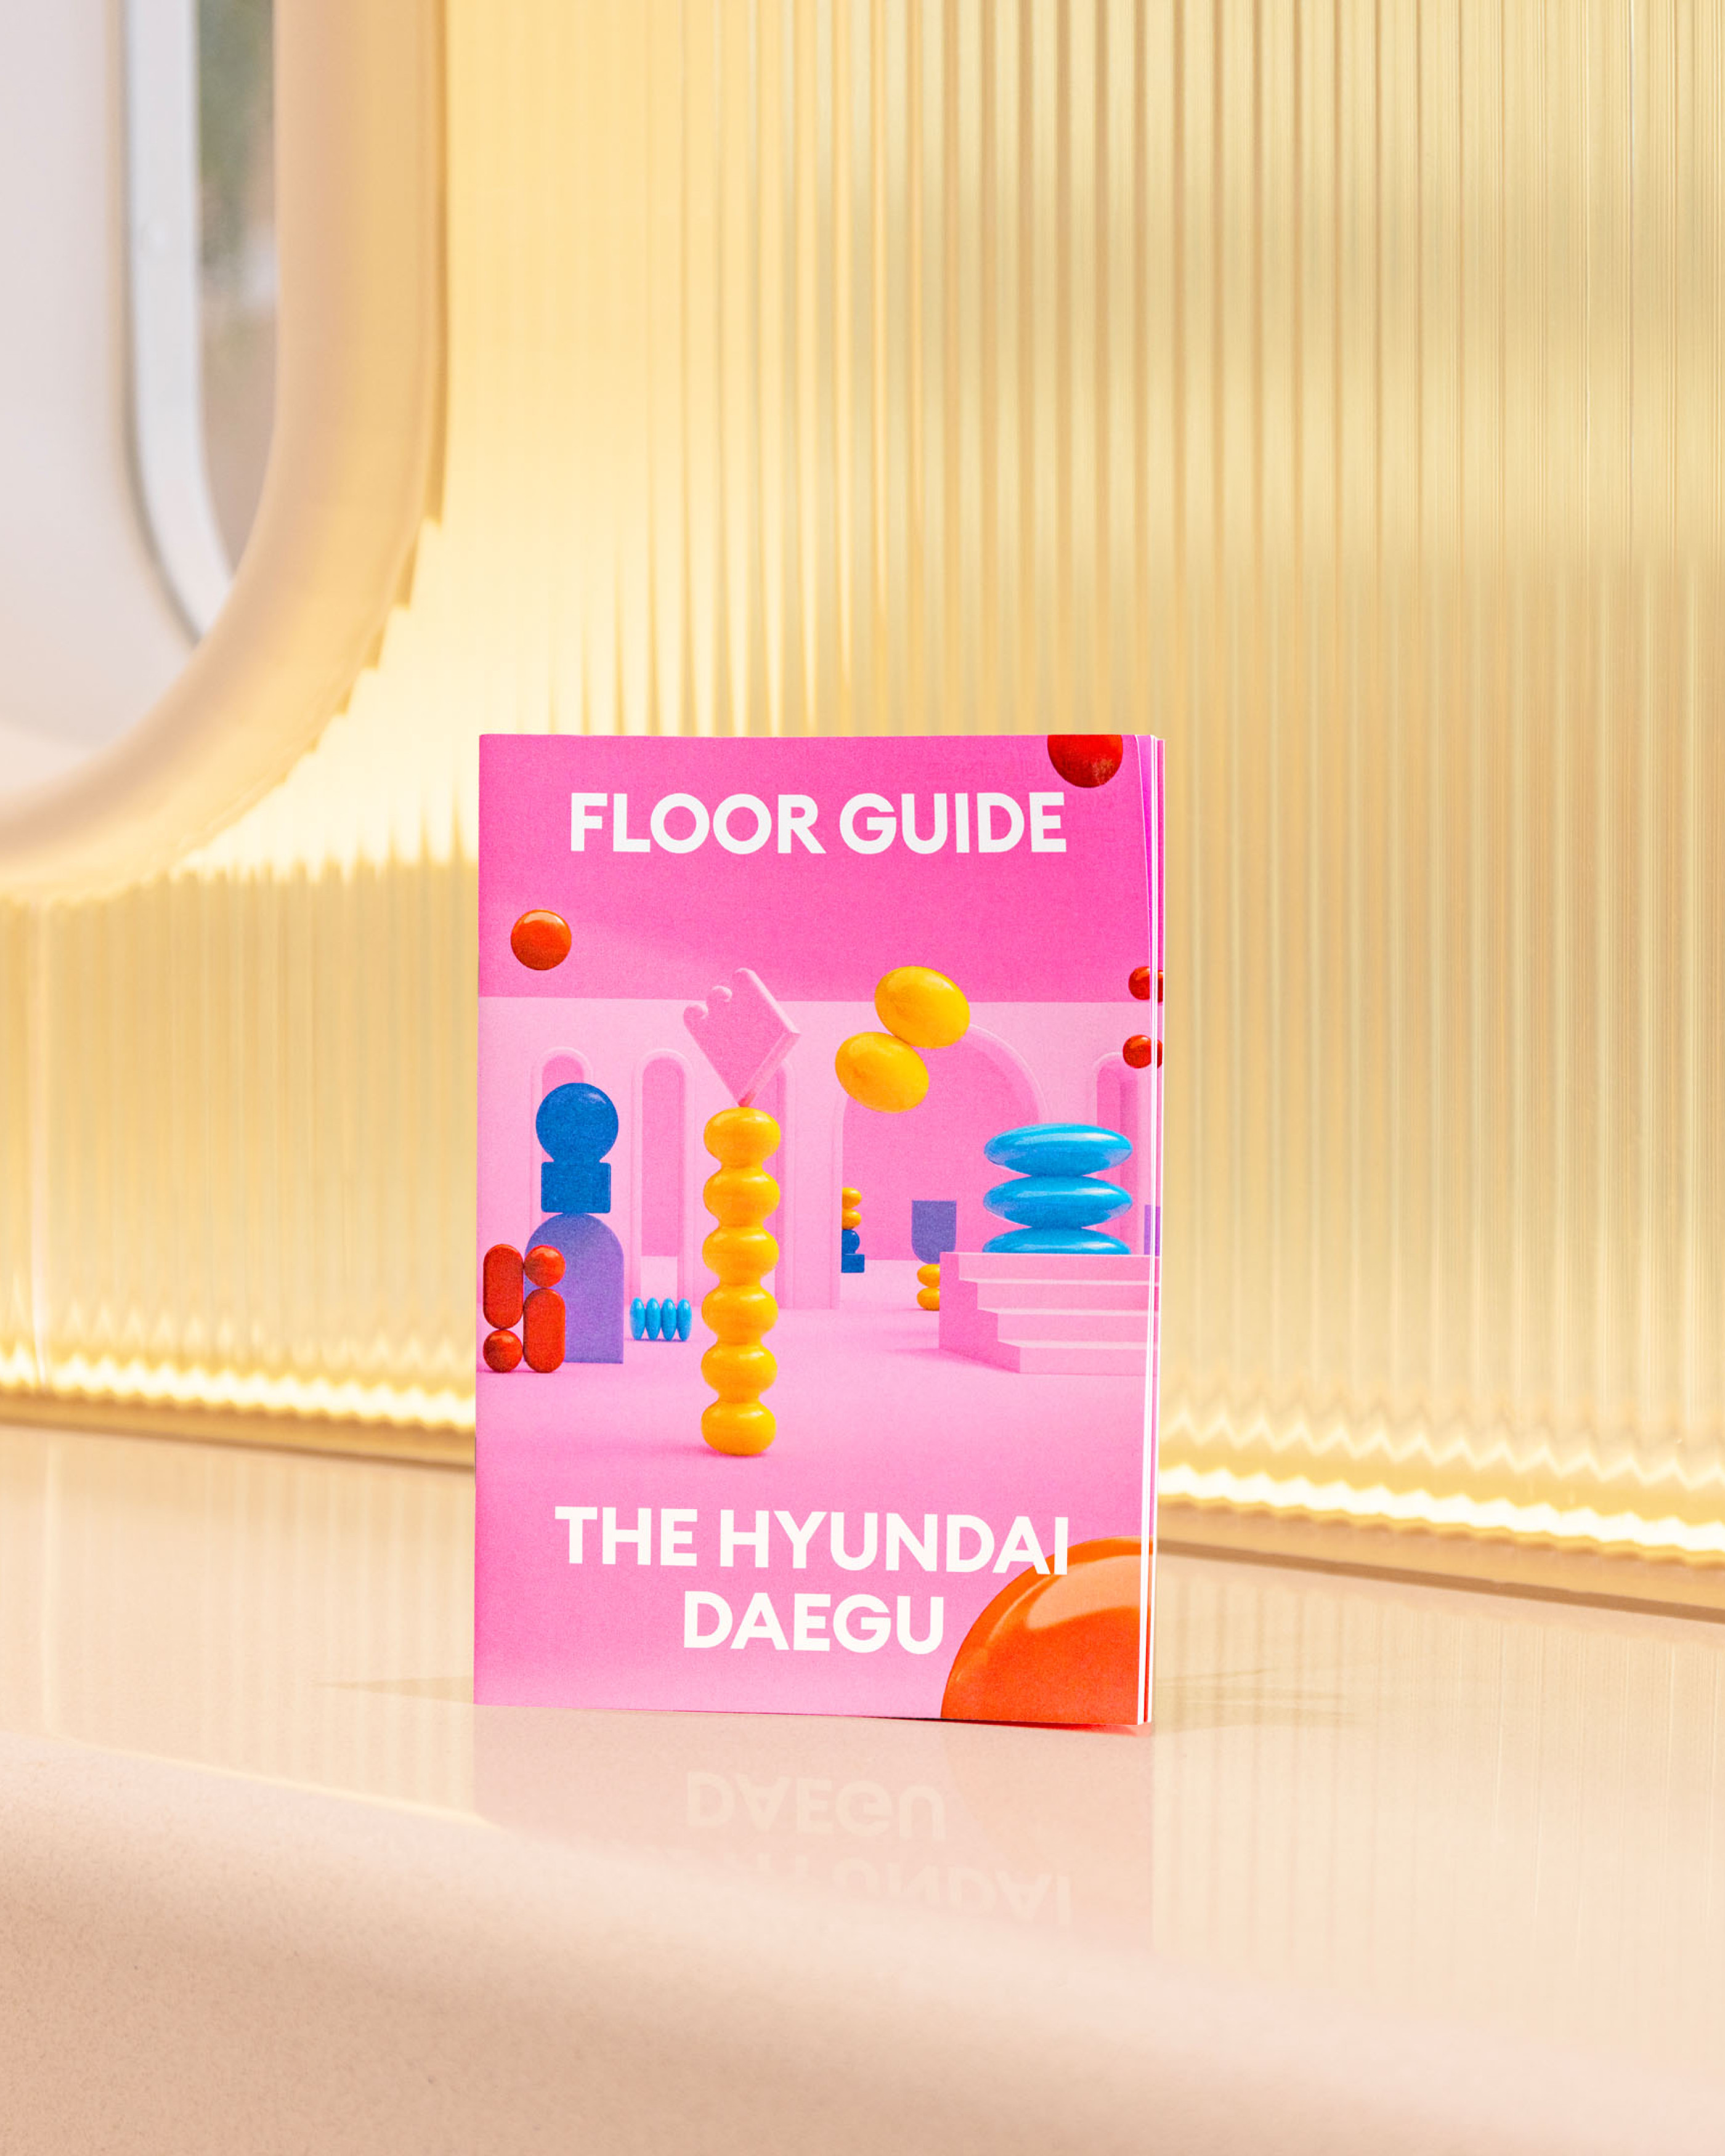 Floor guide design as part of a campaign for the Hyundai Department Store in Daegu.